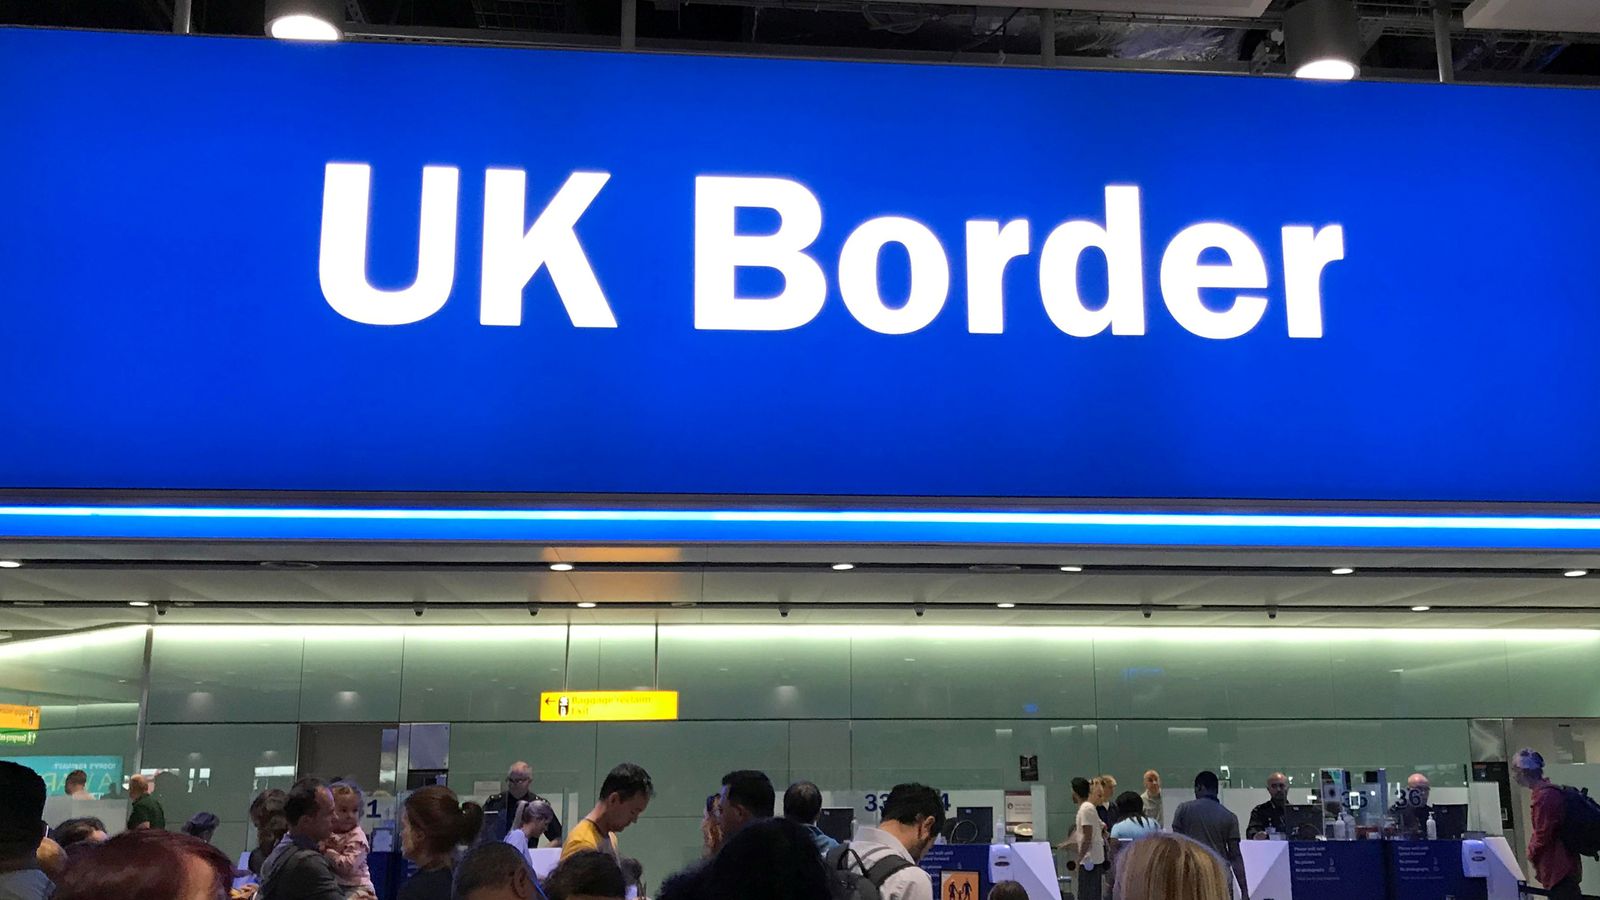 Net migration rose to 672,000 in year to June - up from 607,000 in the previous year, latest ONS figures show